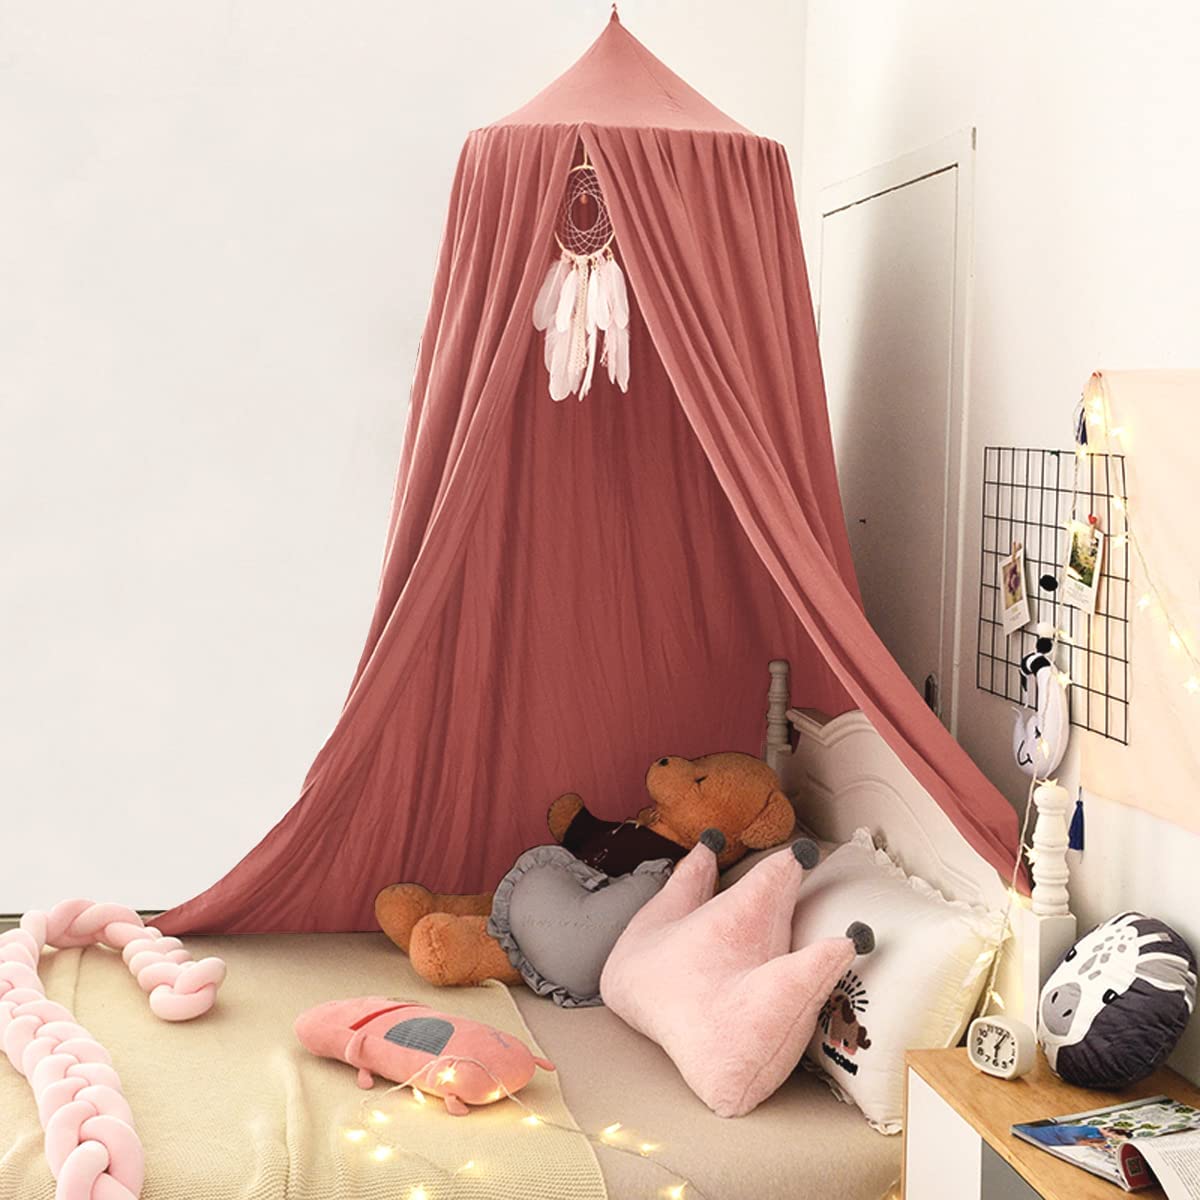 9. Kertnic Mosquito Net Bedding Decor Canopy for Kids